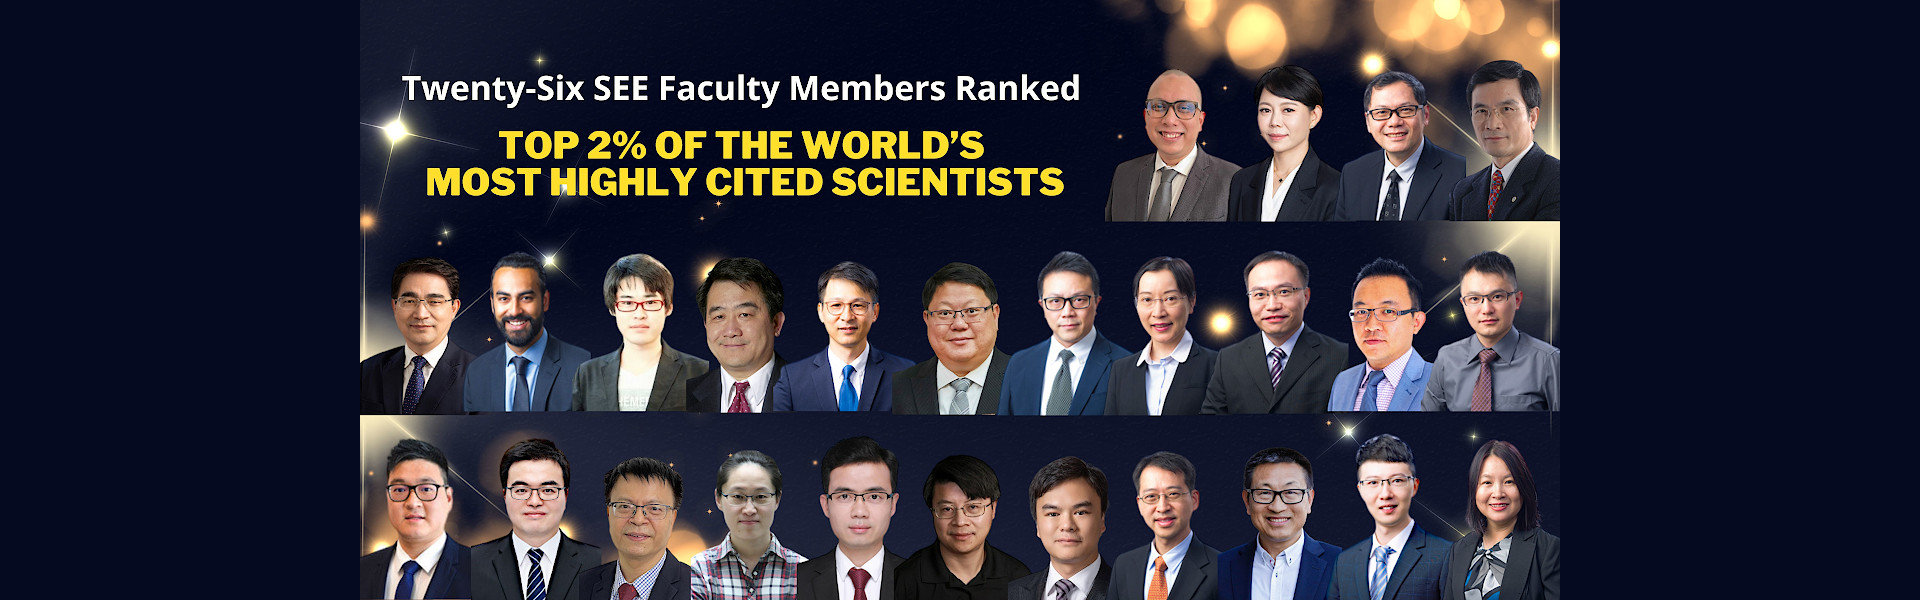 Top 2% of the World’s Most Highly Cited Scientists